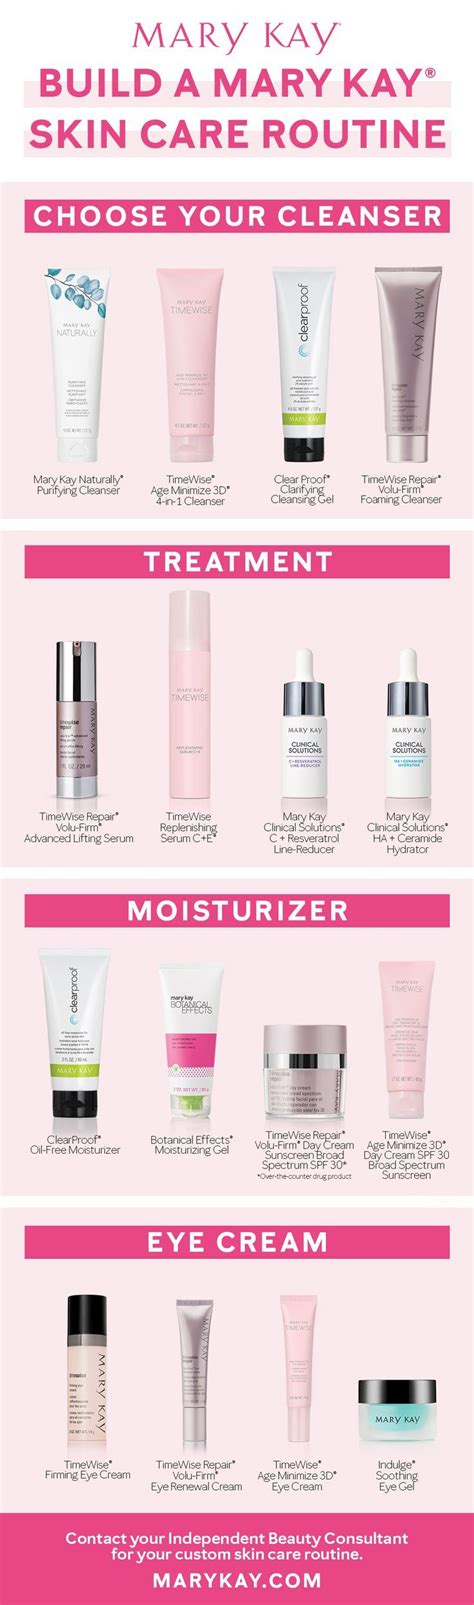 Build Your Skin Care Routine With Mary Kay Mary Kay Skin Care Mary